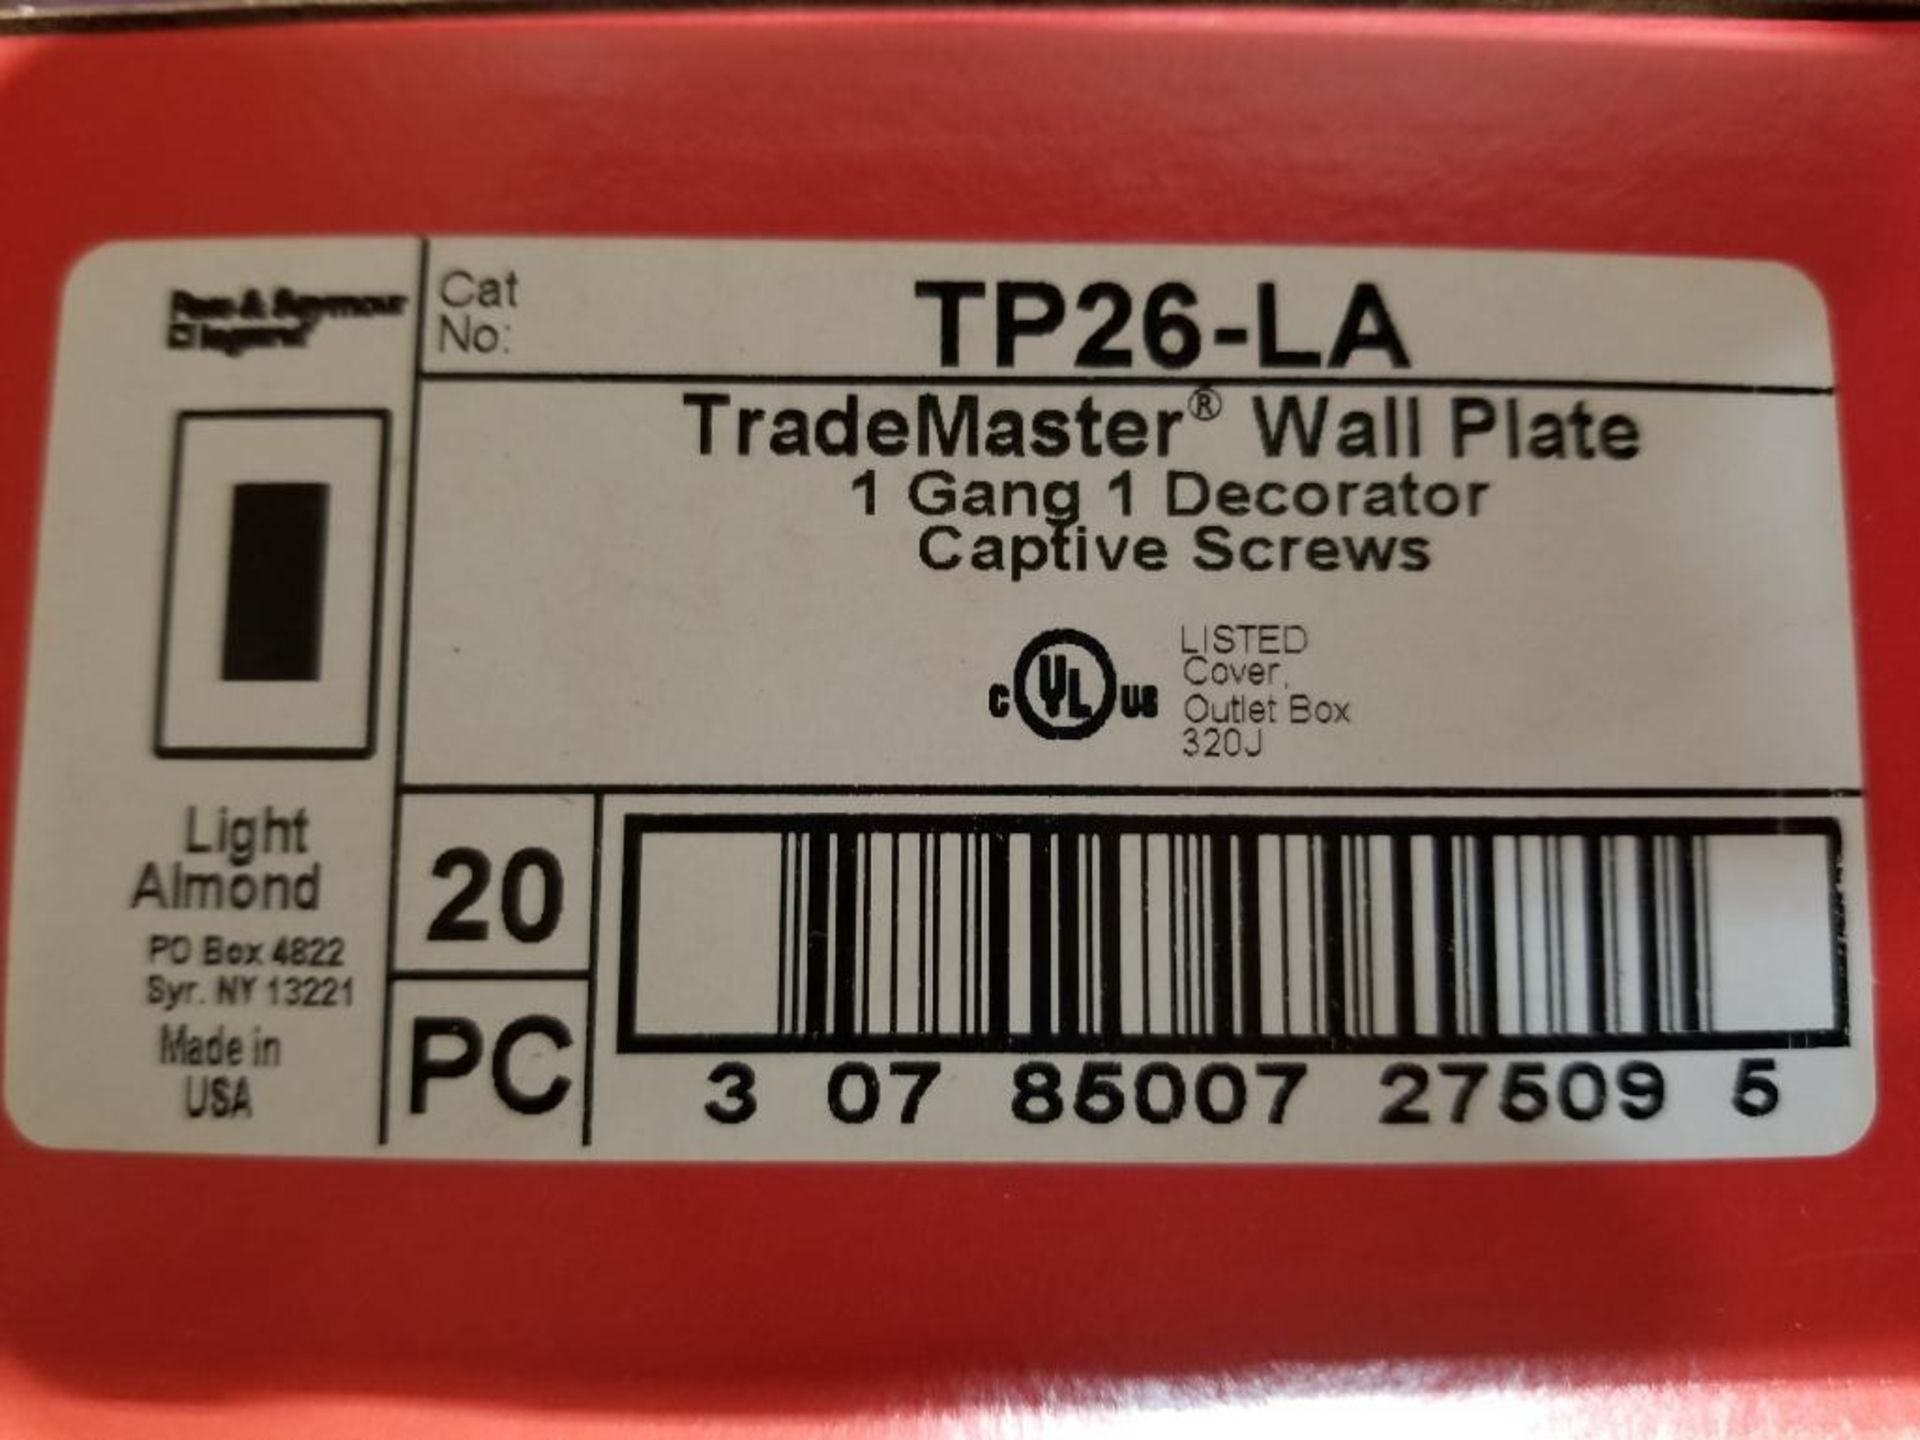 Qty 200 - Legrand Trademaster wall plate. Single gang. Part number TP26-LA. Light Almond. - Image 2 of 6